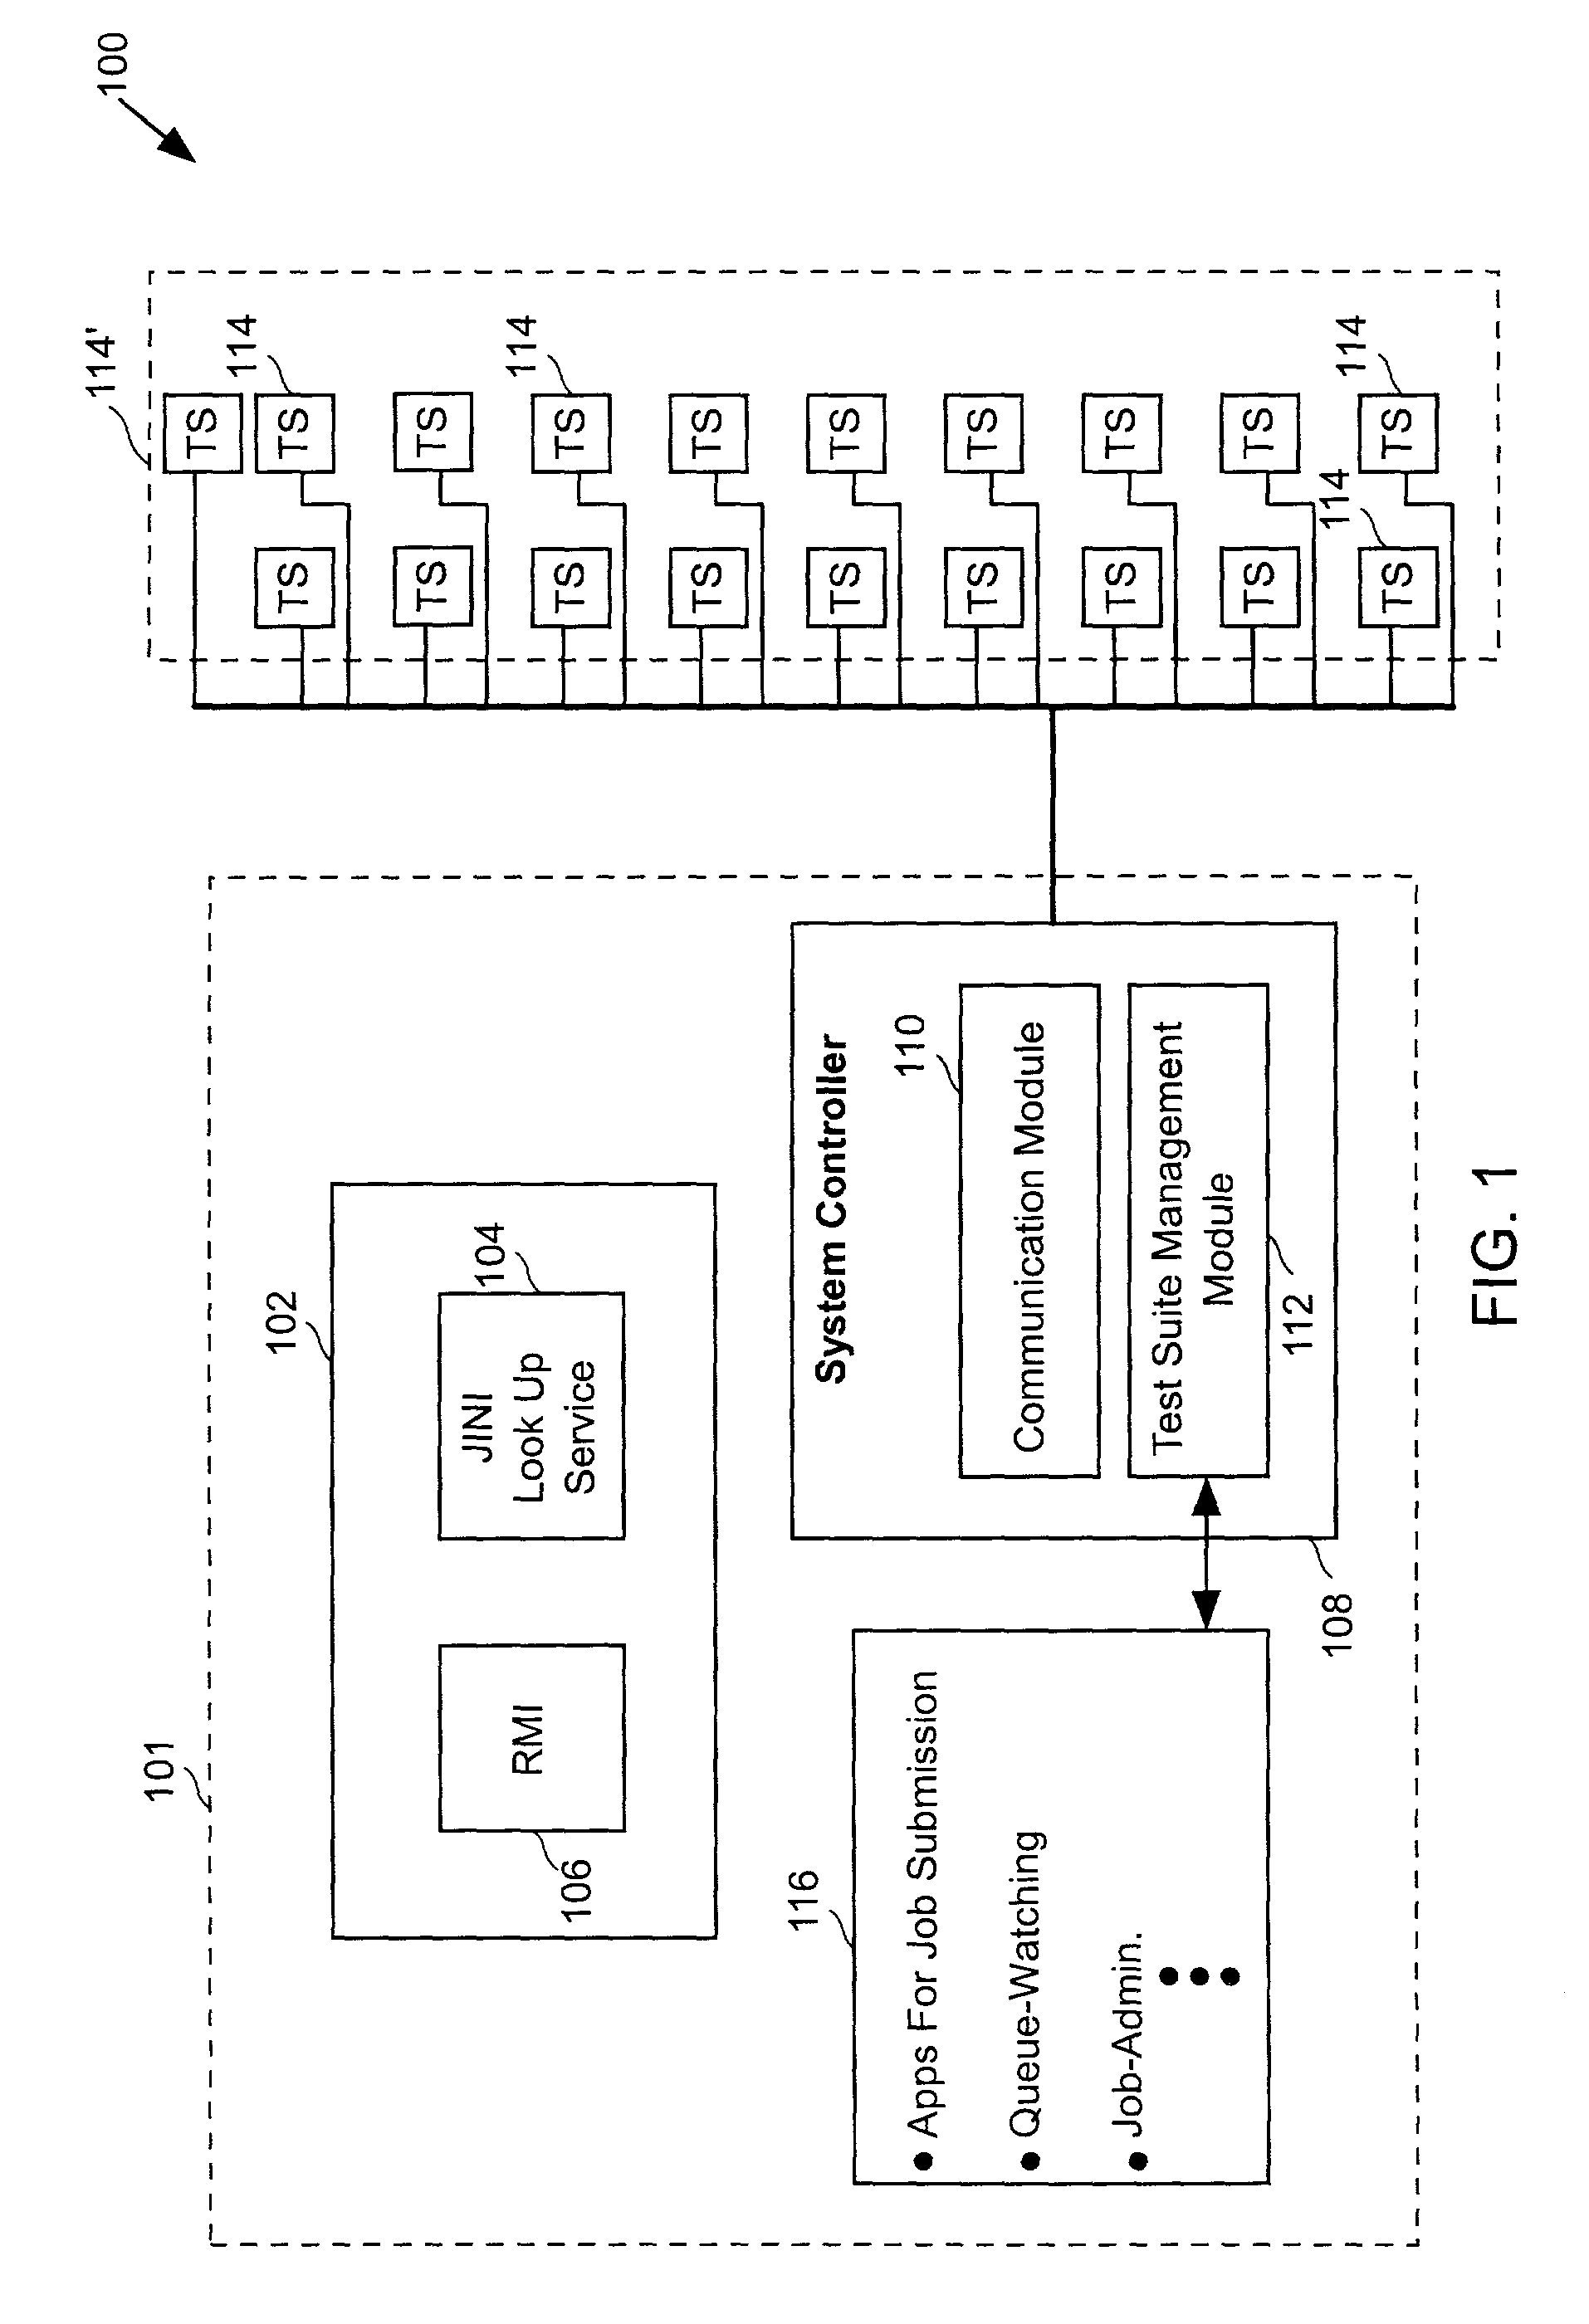 Task grouping in a distributed processing framework system and methods for implementing the same